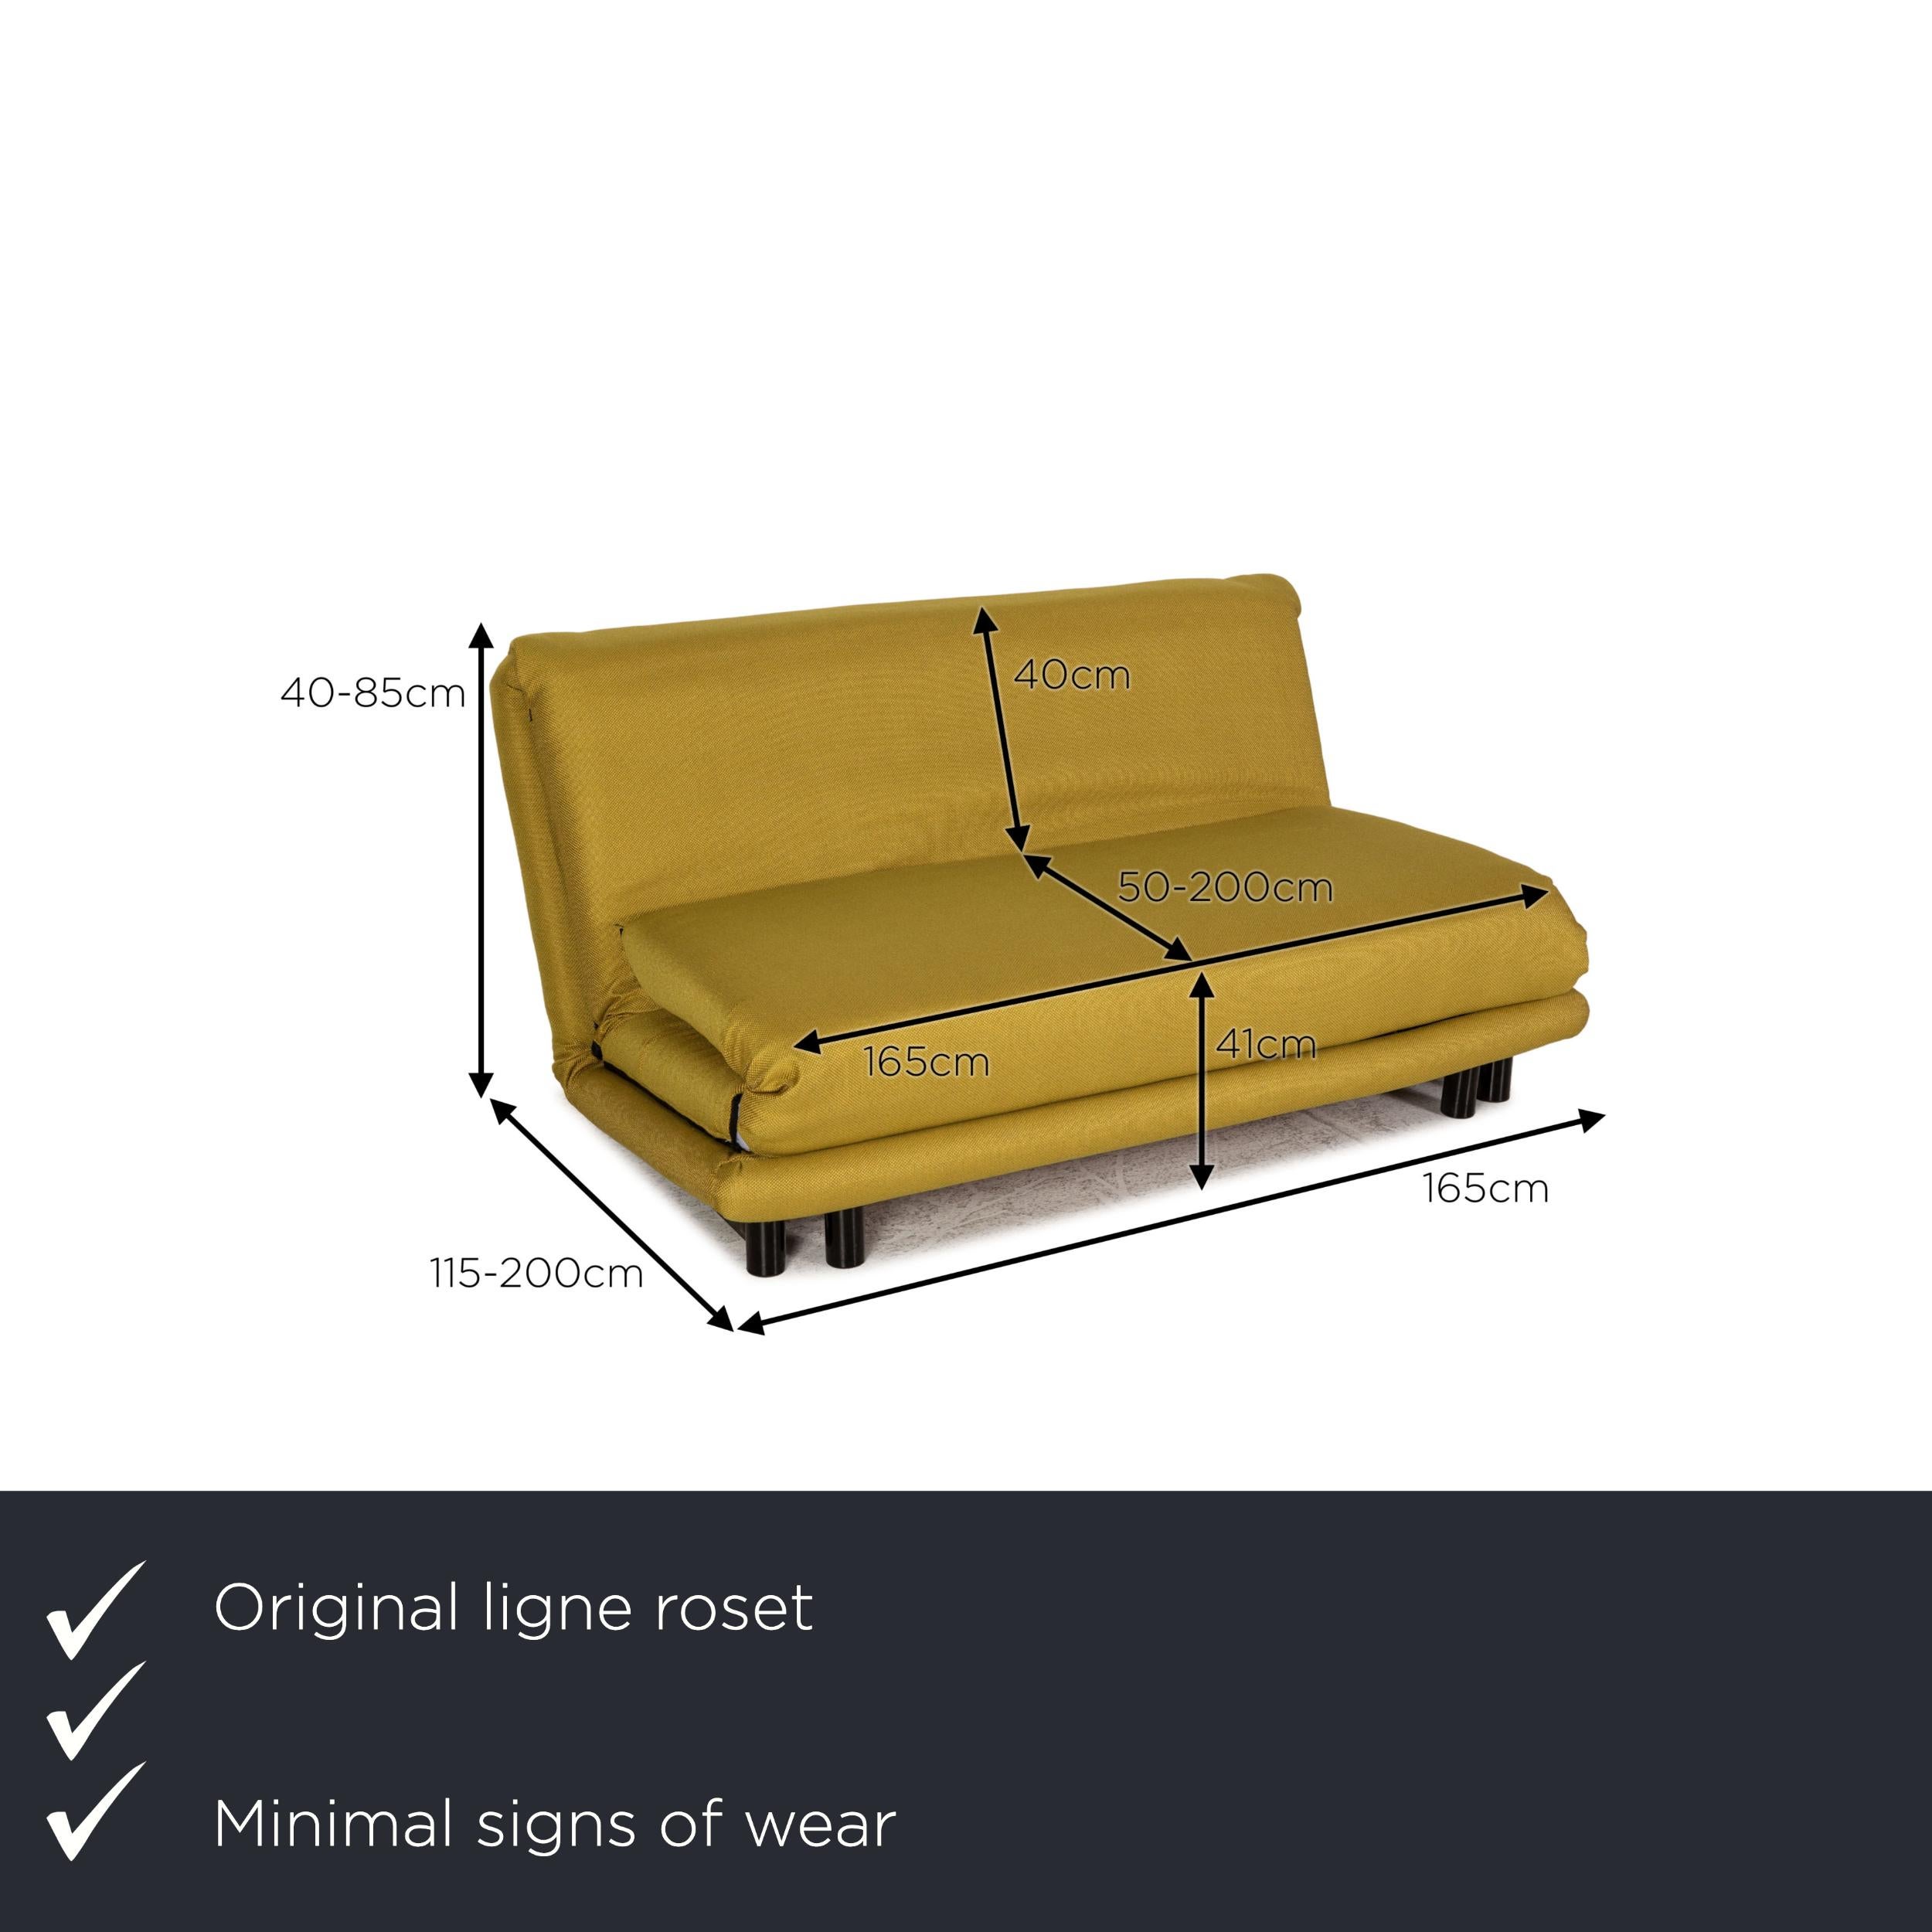 We present to you a ligne roset Multy fabric sofa yellow three-seater couch function sleeping.

Product measurements in centimeters:

depth: 115
width: 165
height: 40
seat height: 41
rest height: 
seat depth: 50
seat width: 50
back